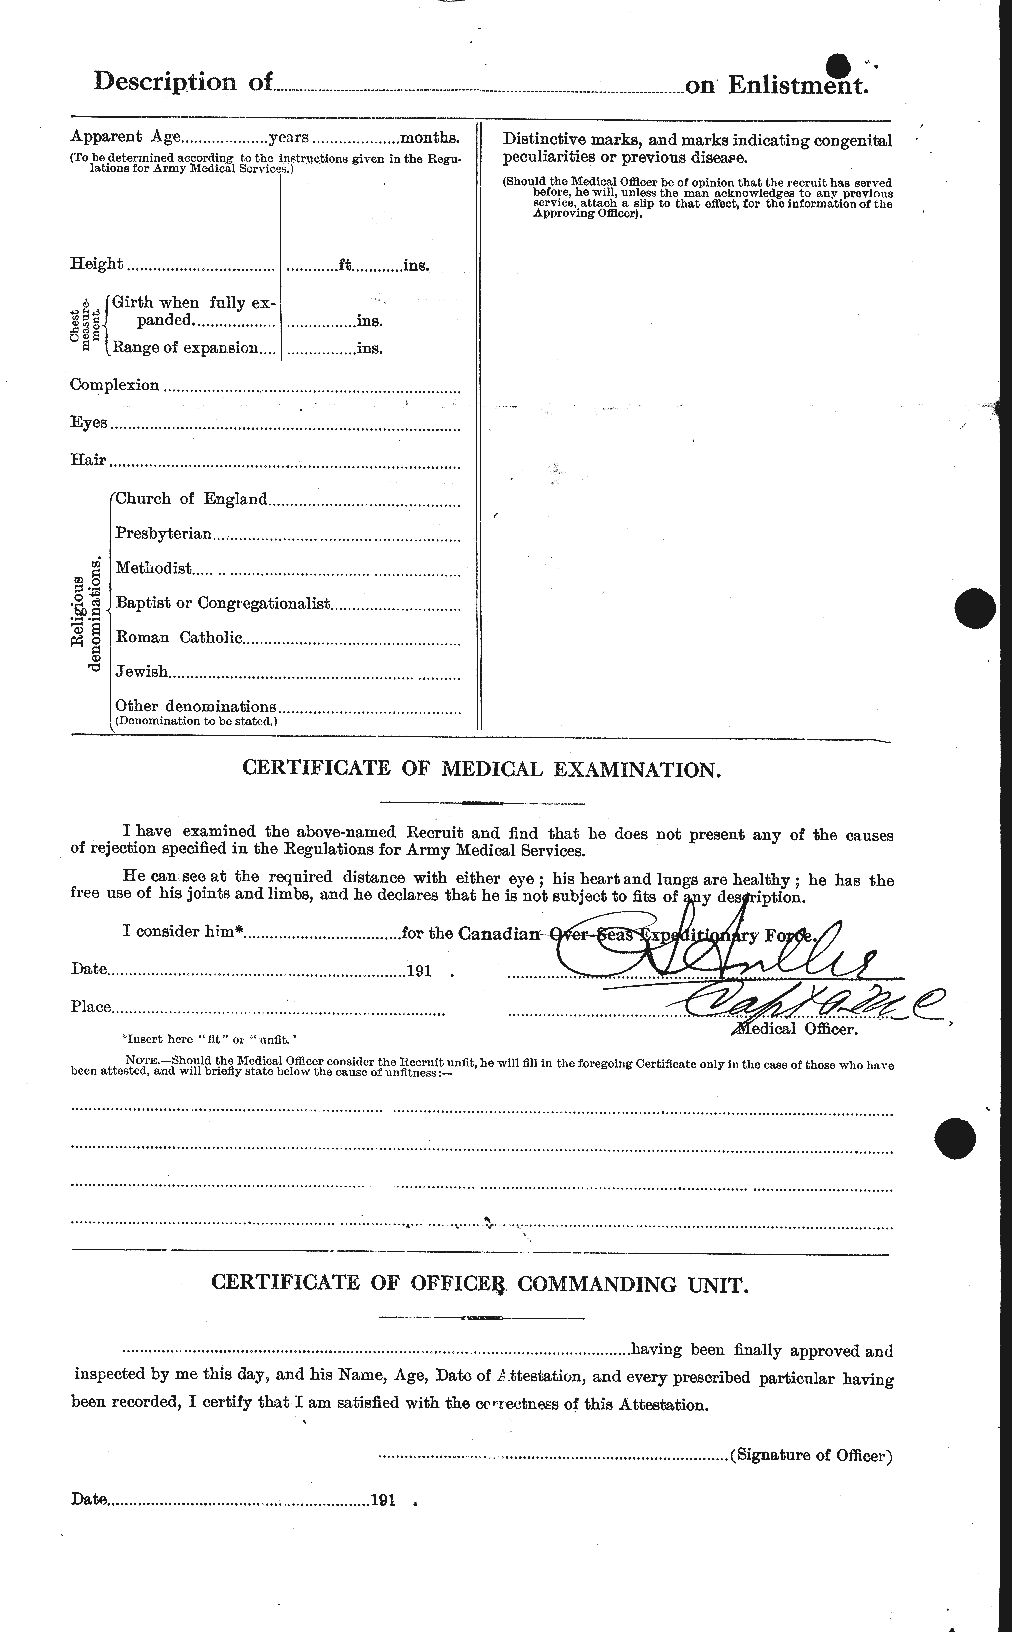 Personnel Records of the First World War - CEF 508407b